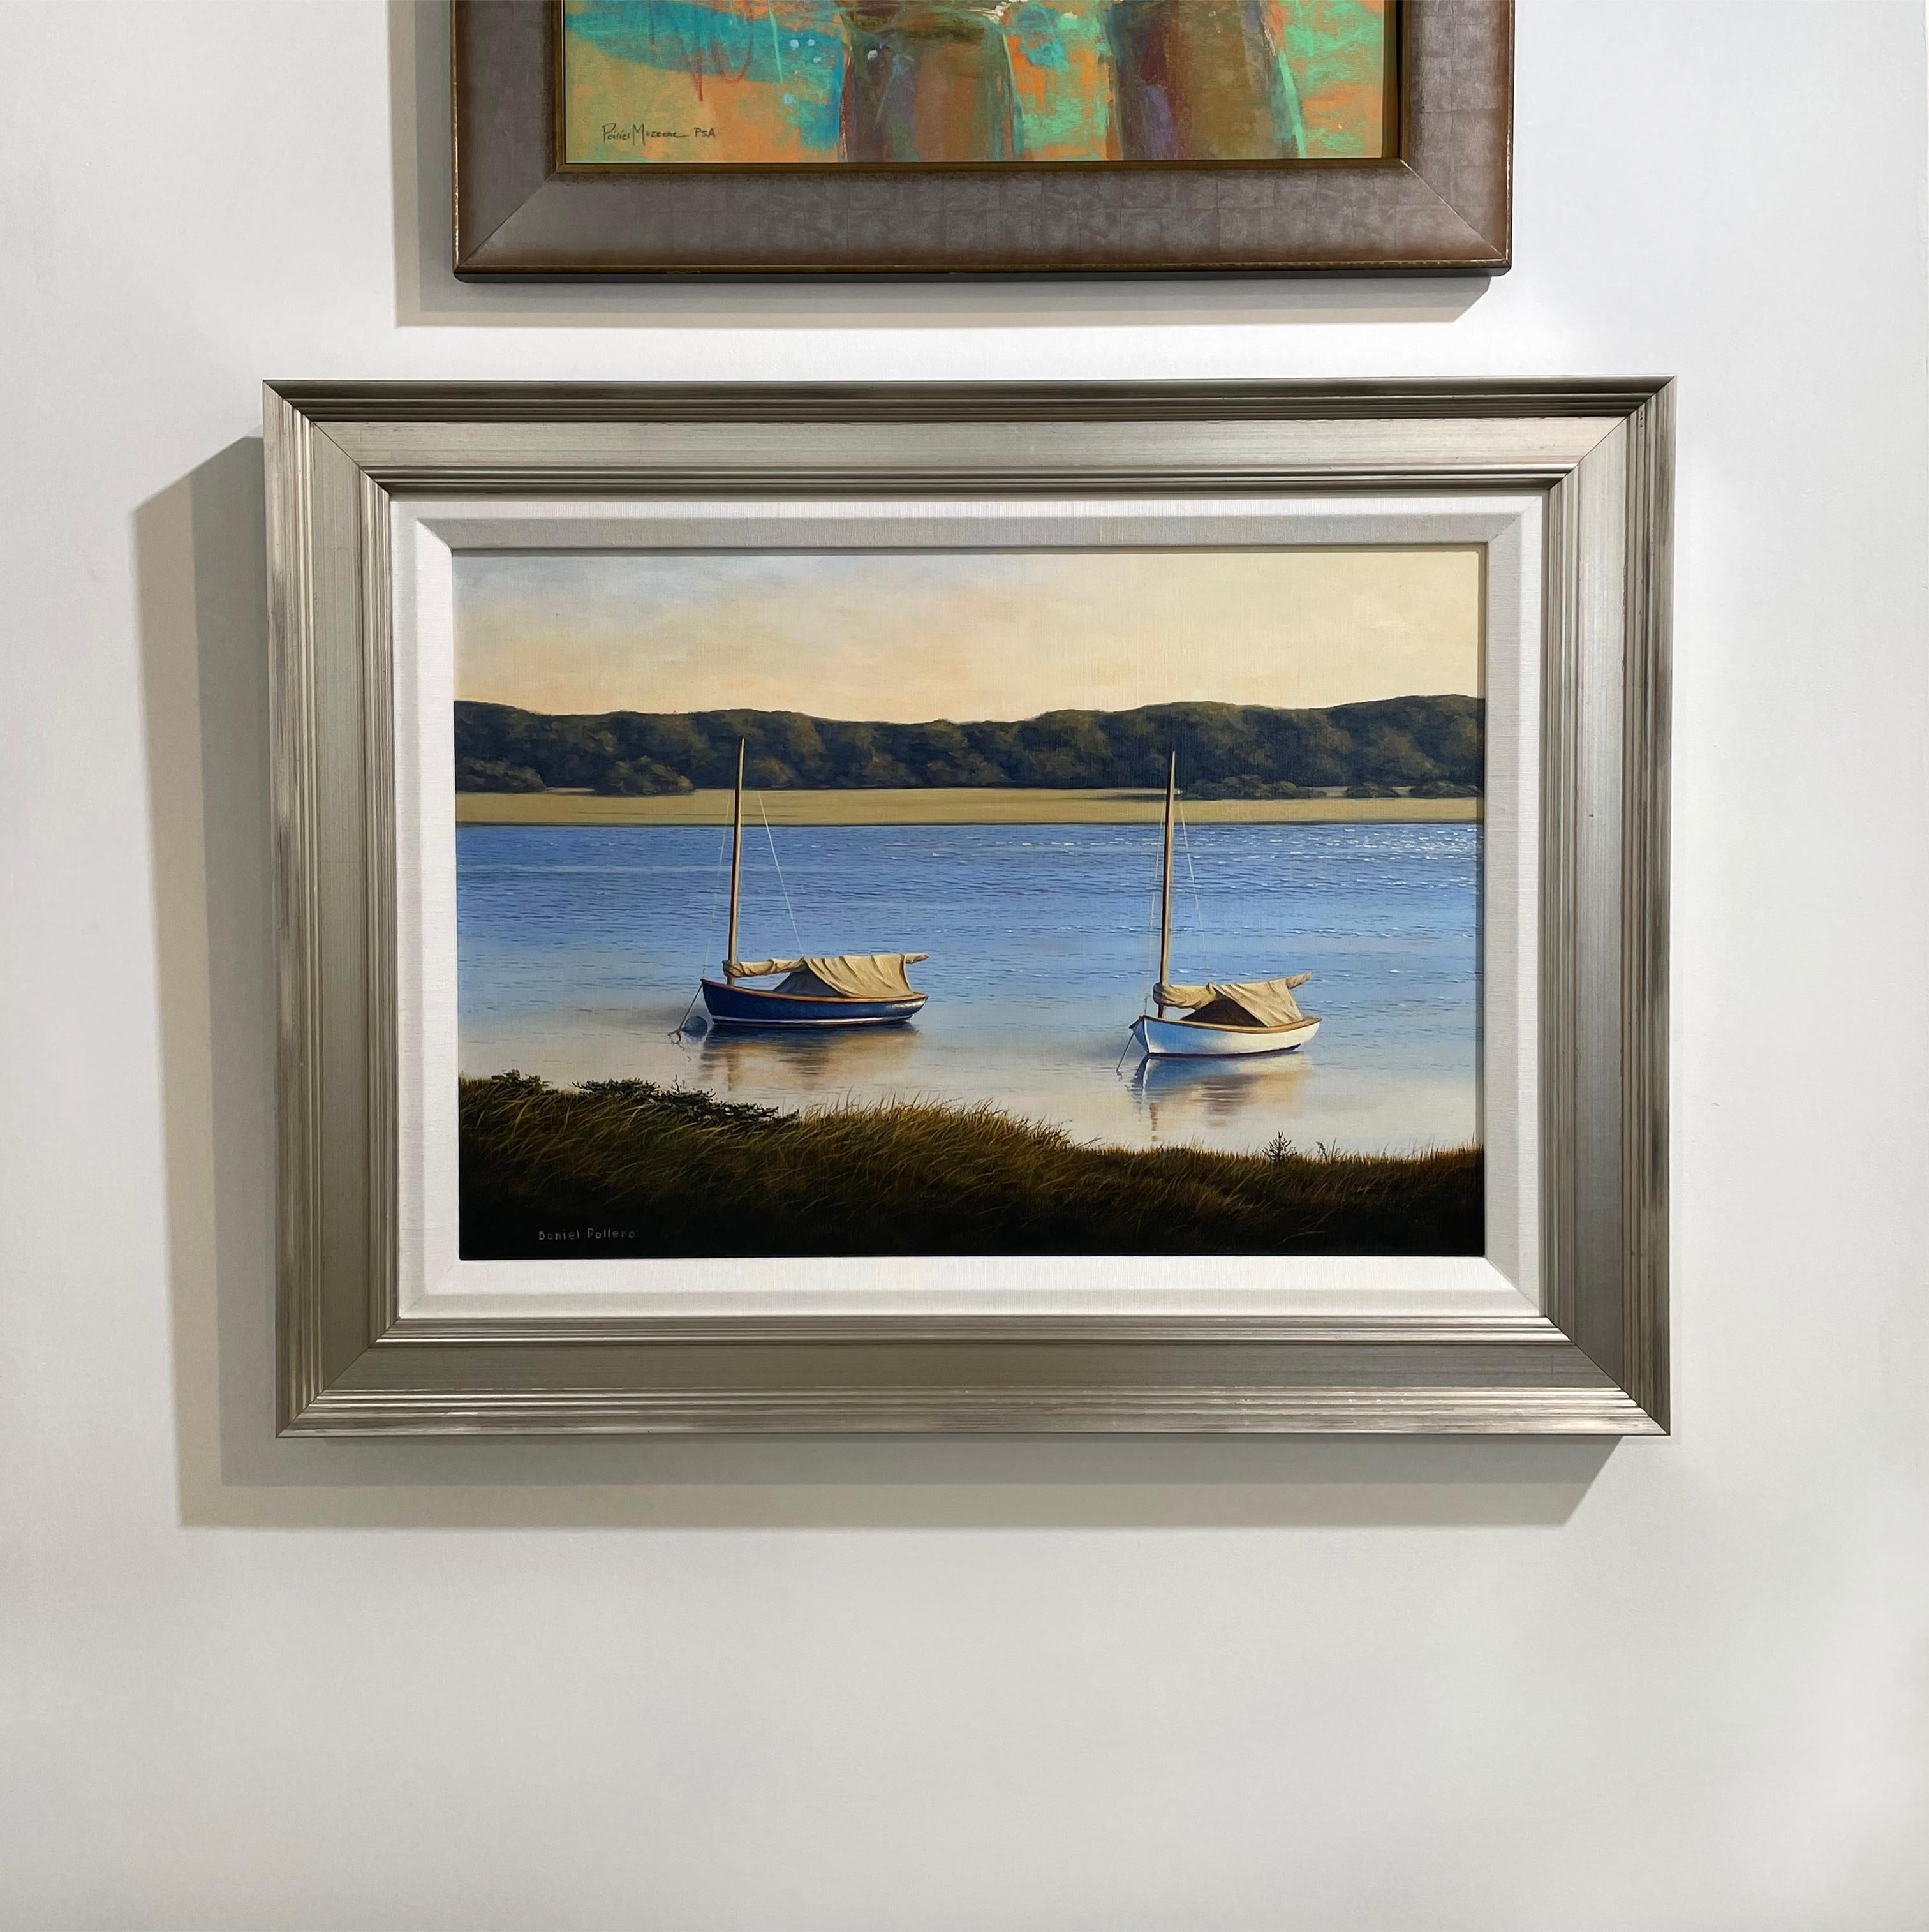 This traditional coastal oil painting by contemporary realist painter Daniel Pollera captures two small sailboats, one white and one navy blue, anchored along a grassy shoreline in the foreground. The boats' reflections are visible in the pale